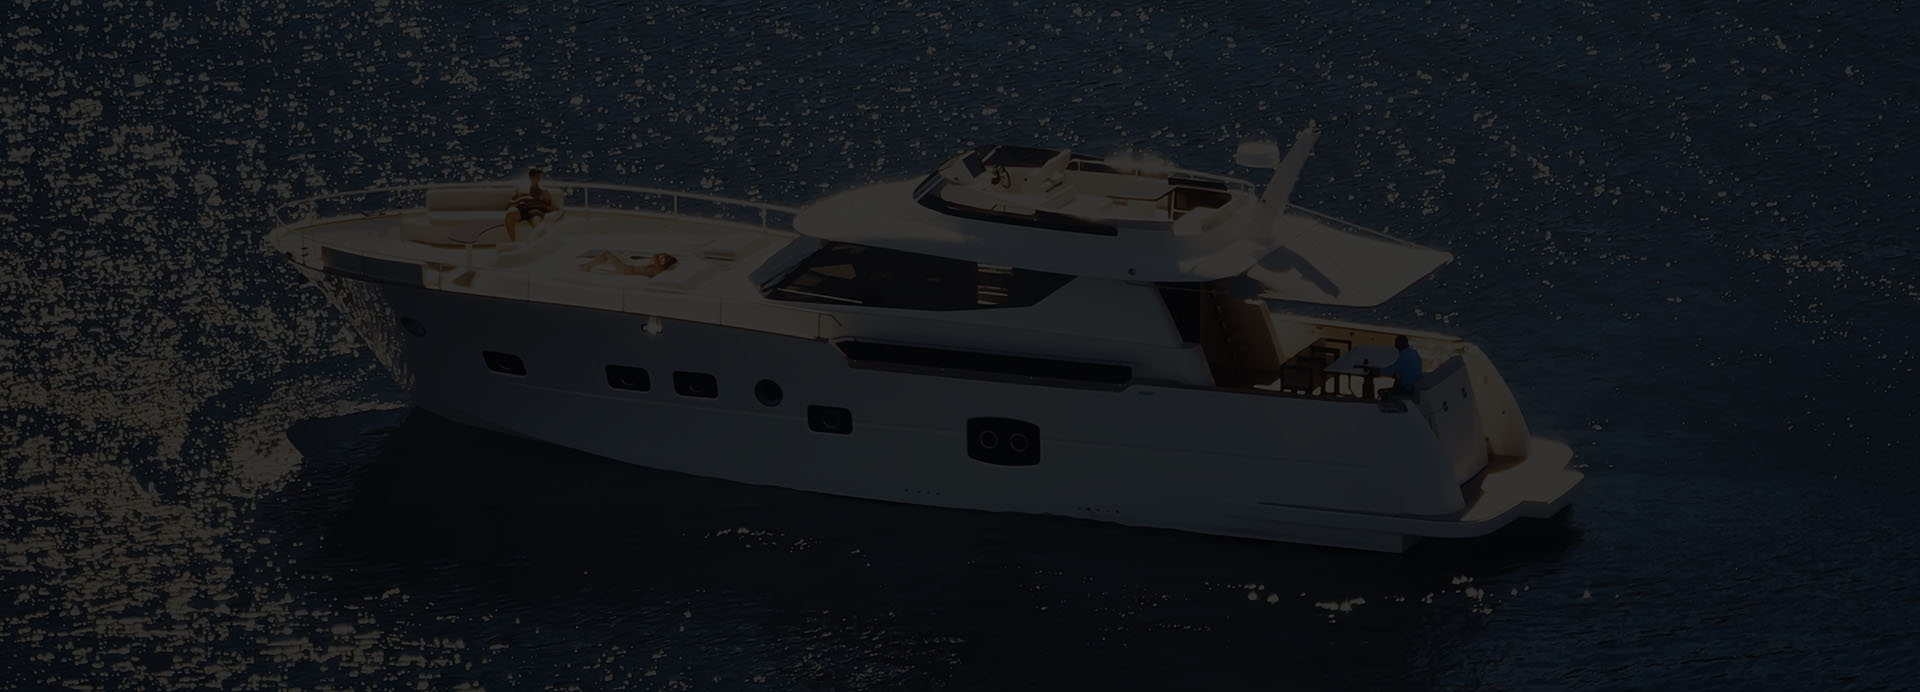 Contact Our luxury Yacht Dealers in Toronto Today